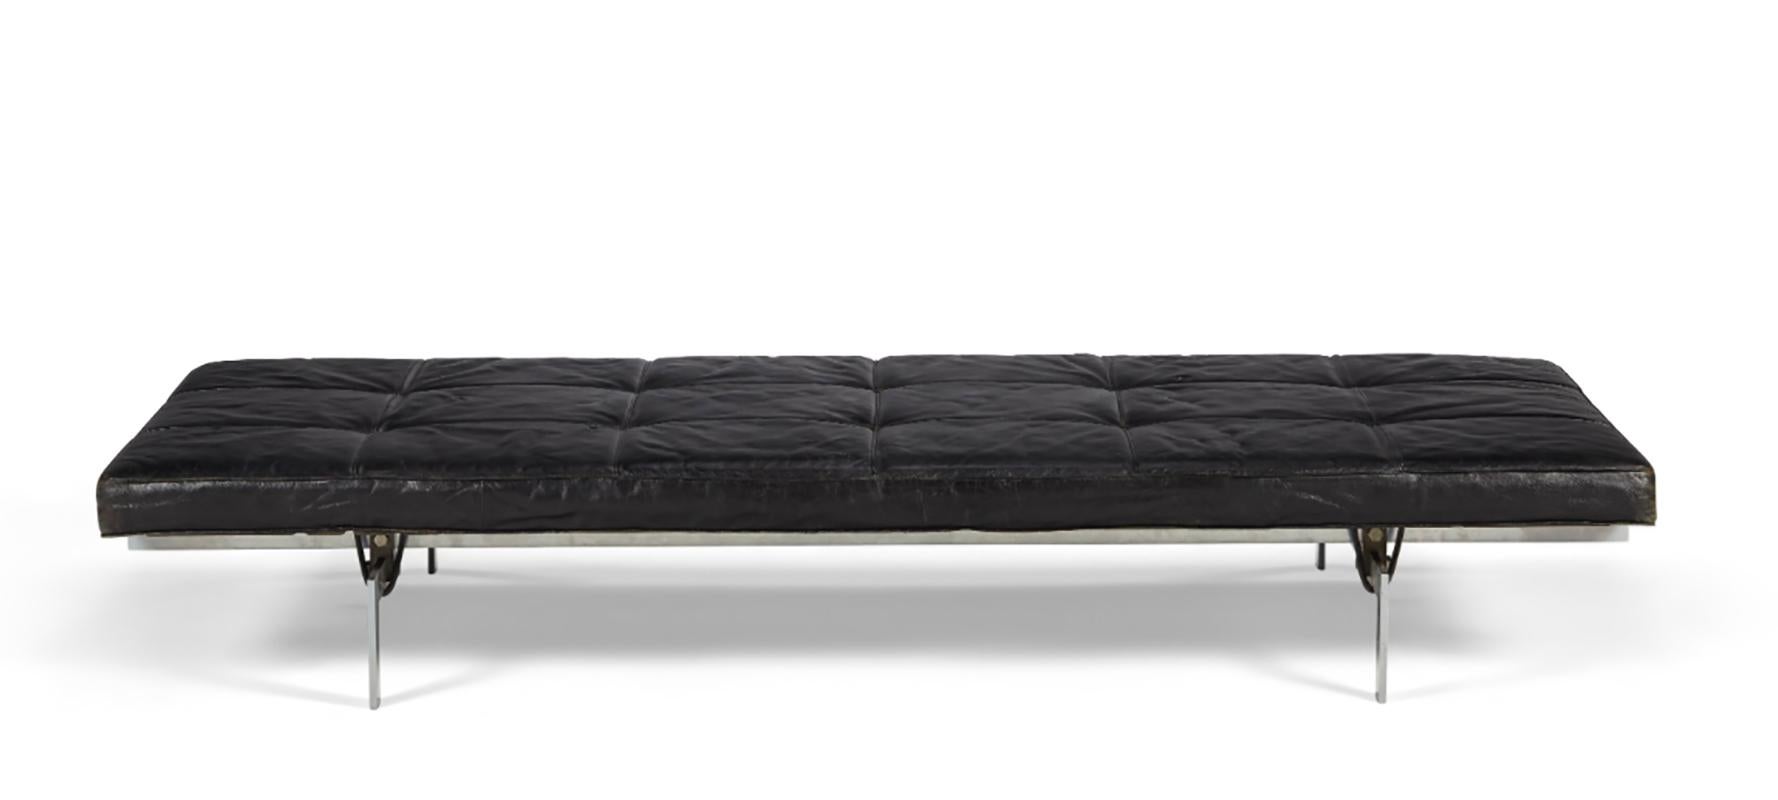 A model PK 80 leather and steel daybed designed by Poul Kjaerholm in 1957 and produced by E. Kold Christensen. Stamped. Restorations to leather.